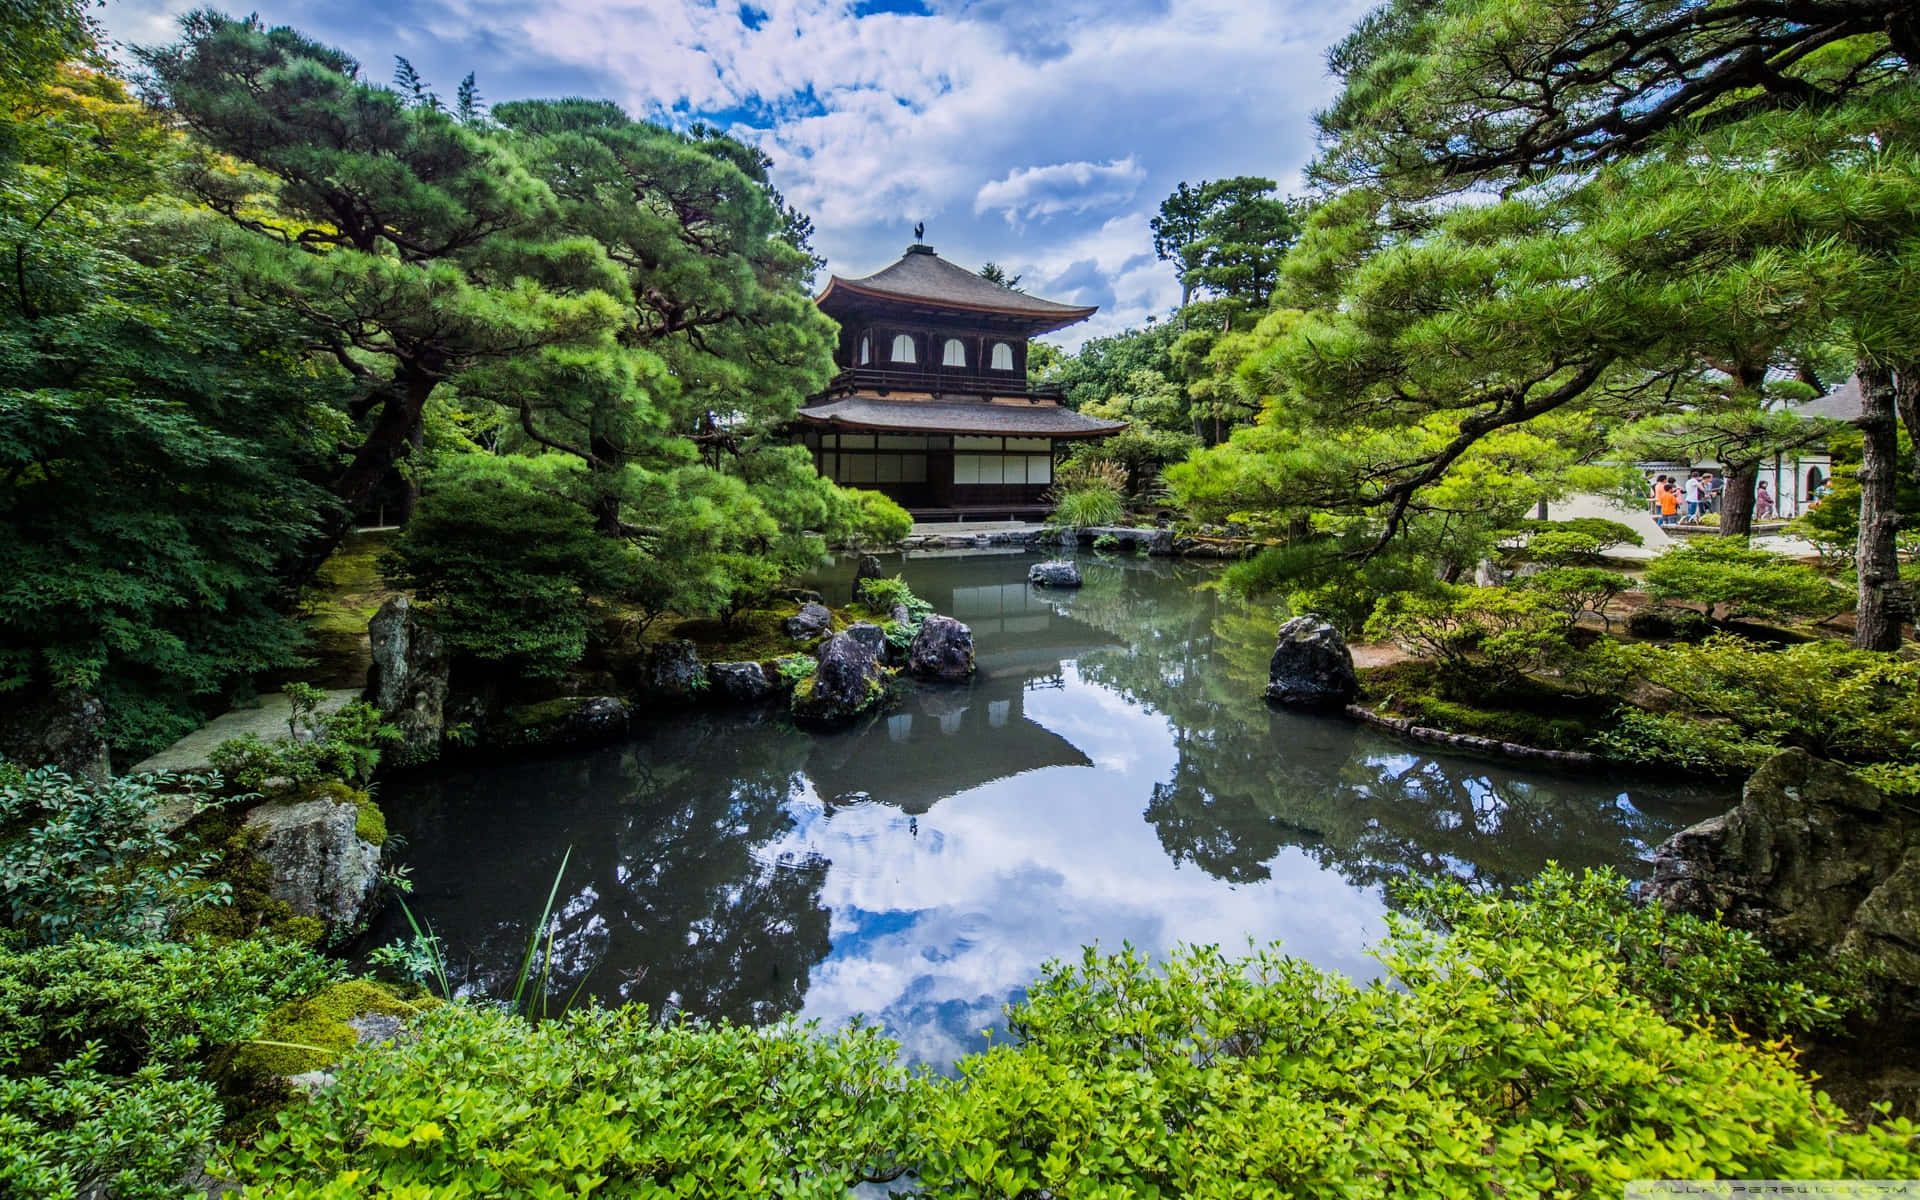 A peaceful, tranquil scene of a Japanese landscape Wallpaper